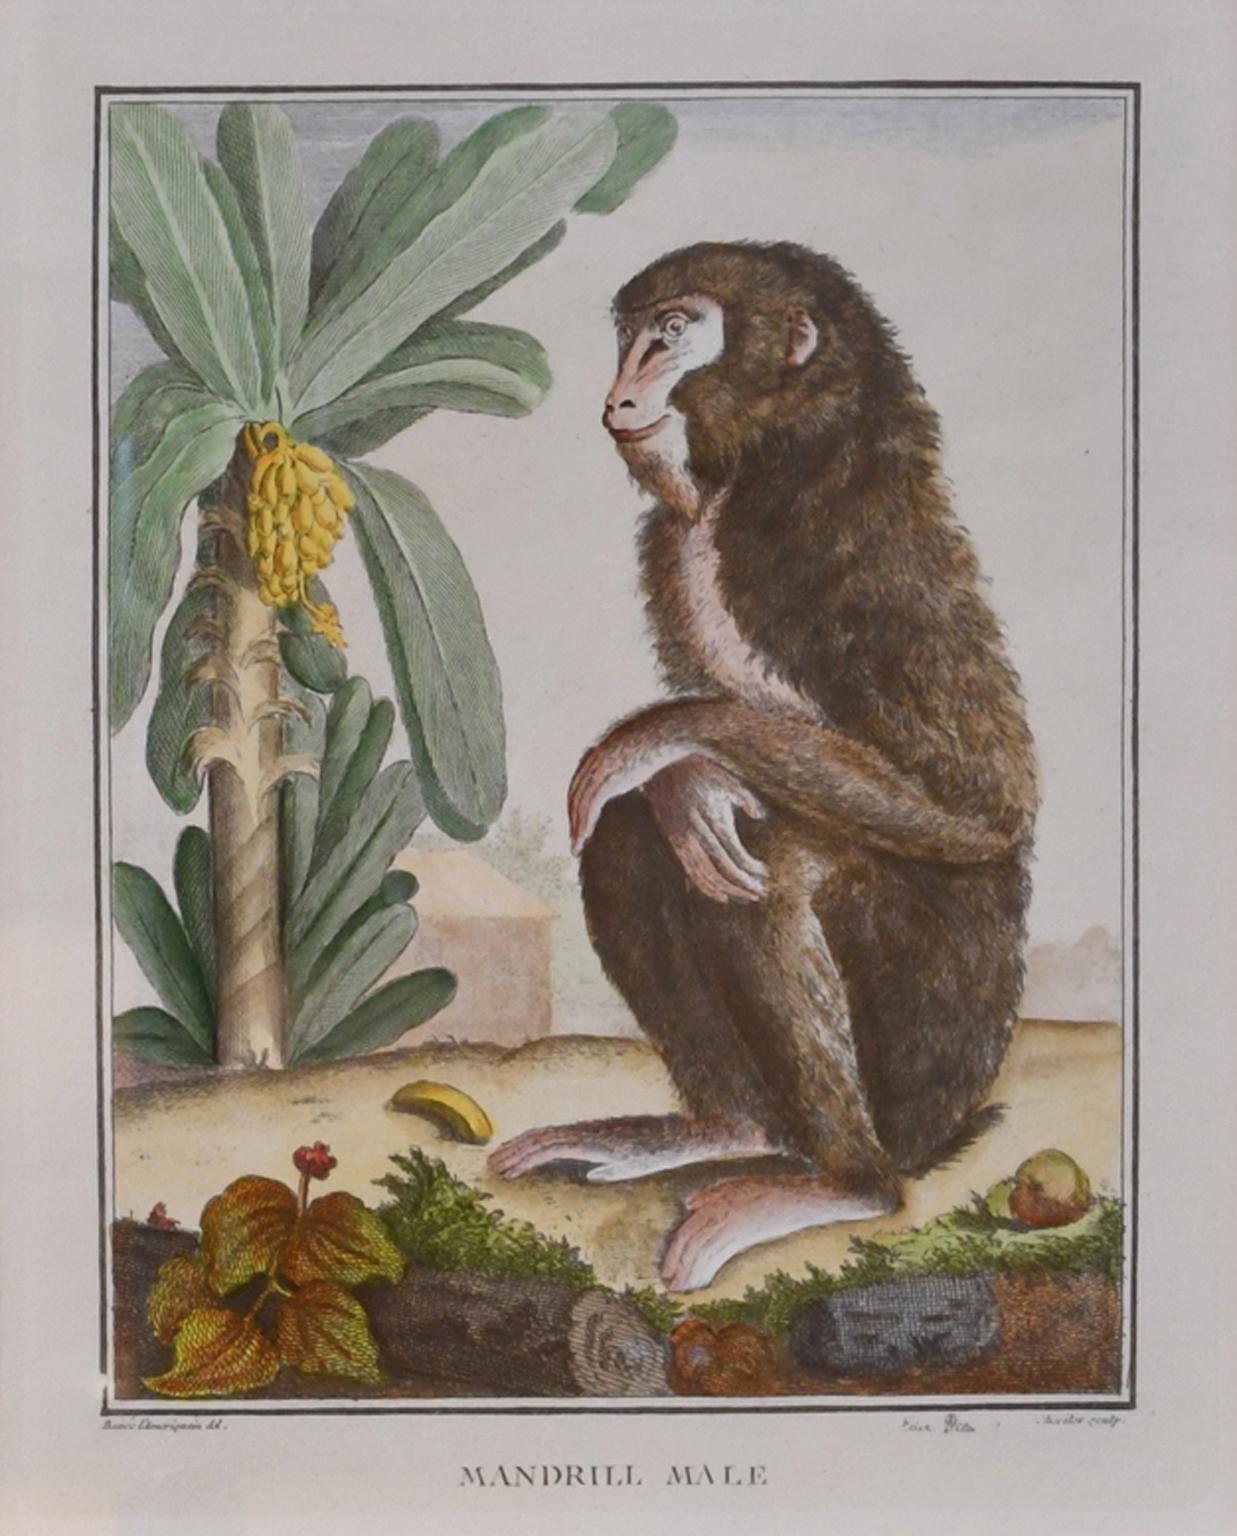 Hand-Painted Set of 4 Framed 18th Century Hand-Colored Engravings of Monkeys by G. Buffon